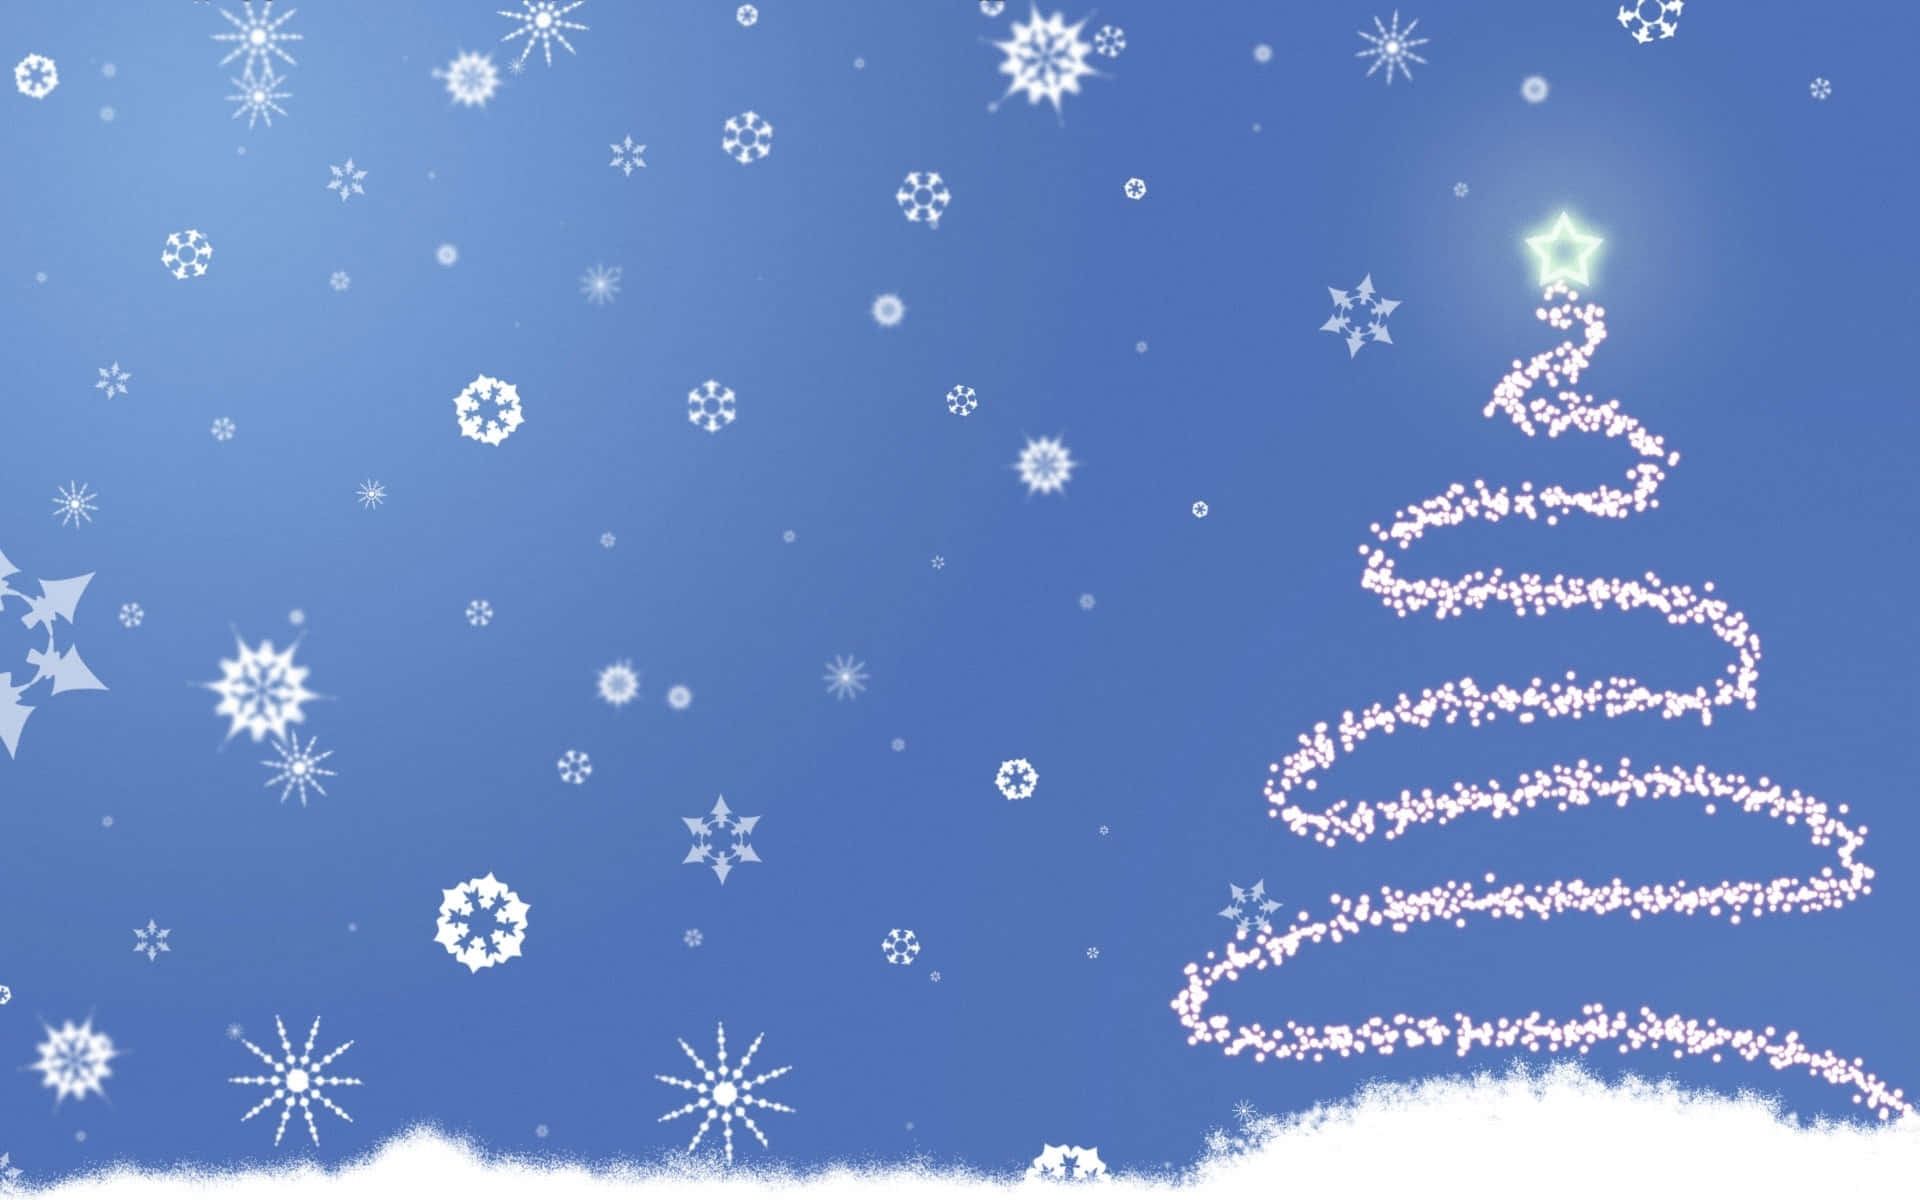 Cute Christmas Tree With Snowflakes Wallpaper